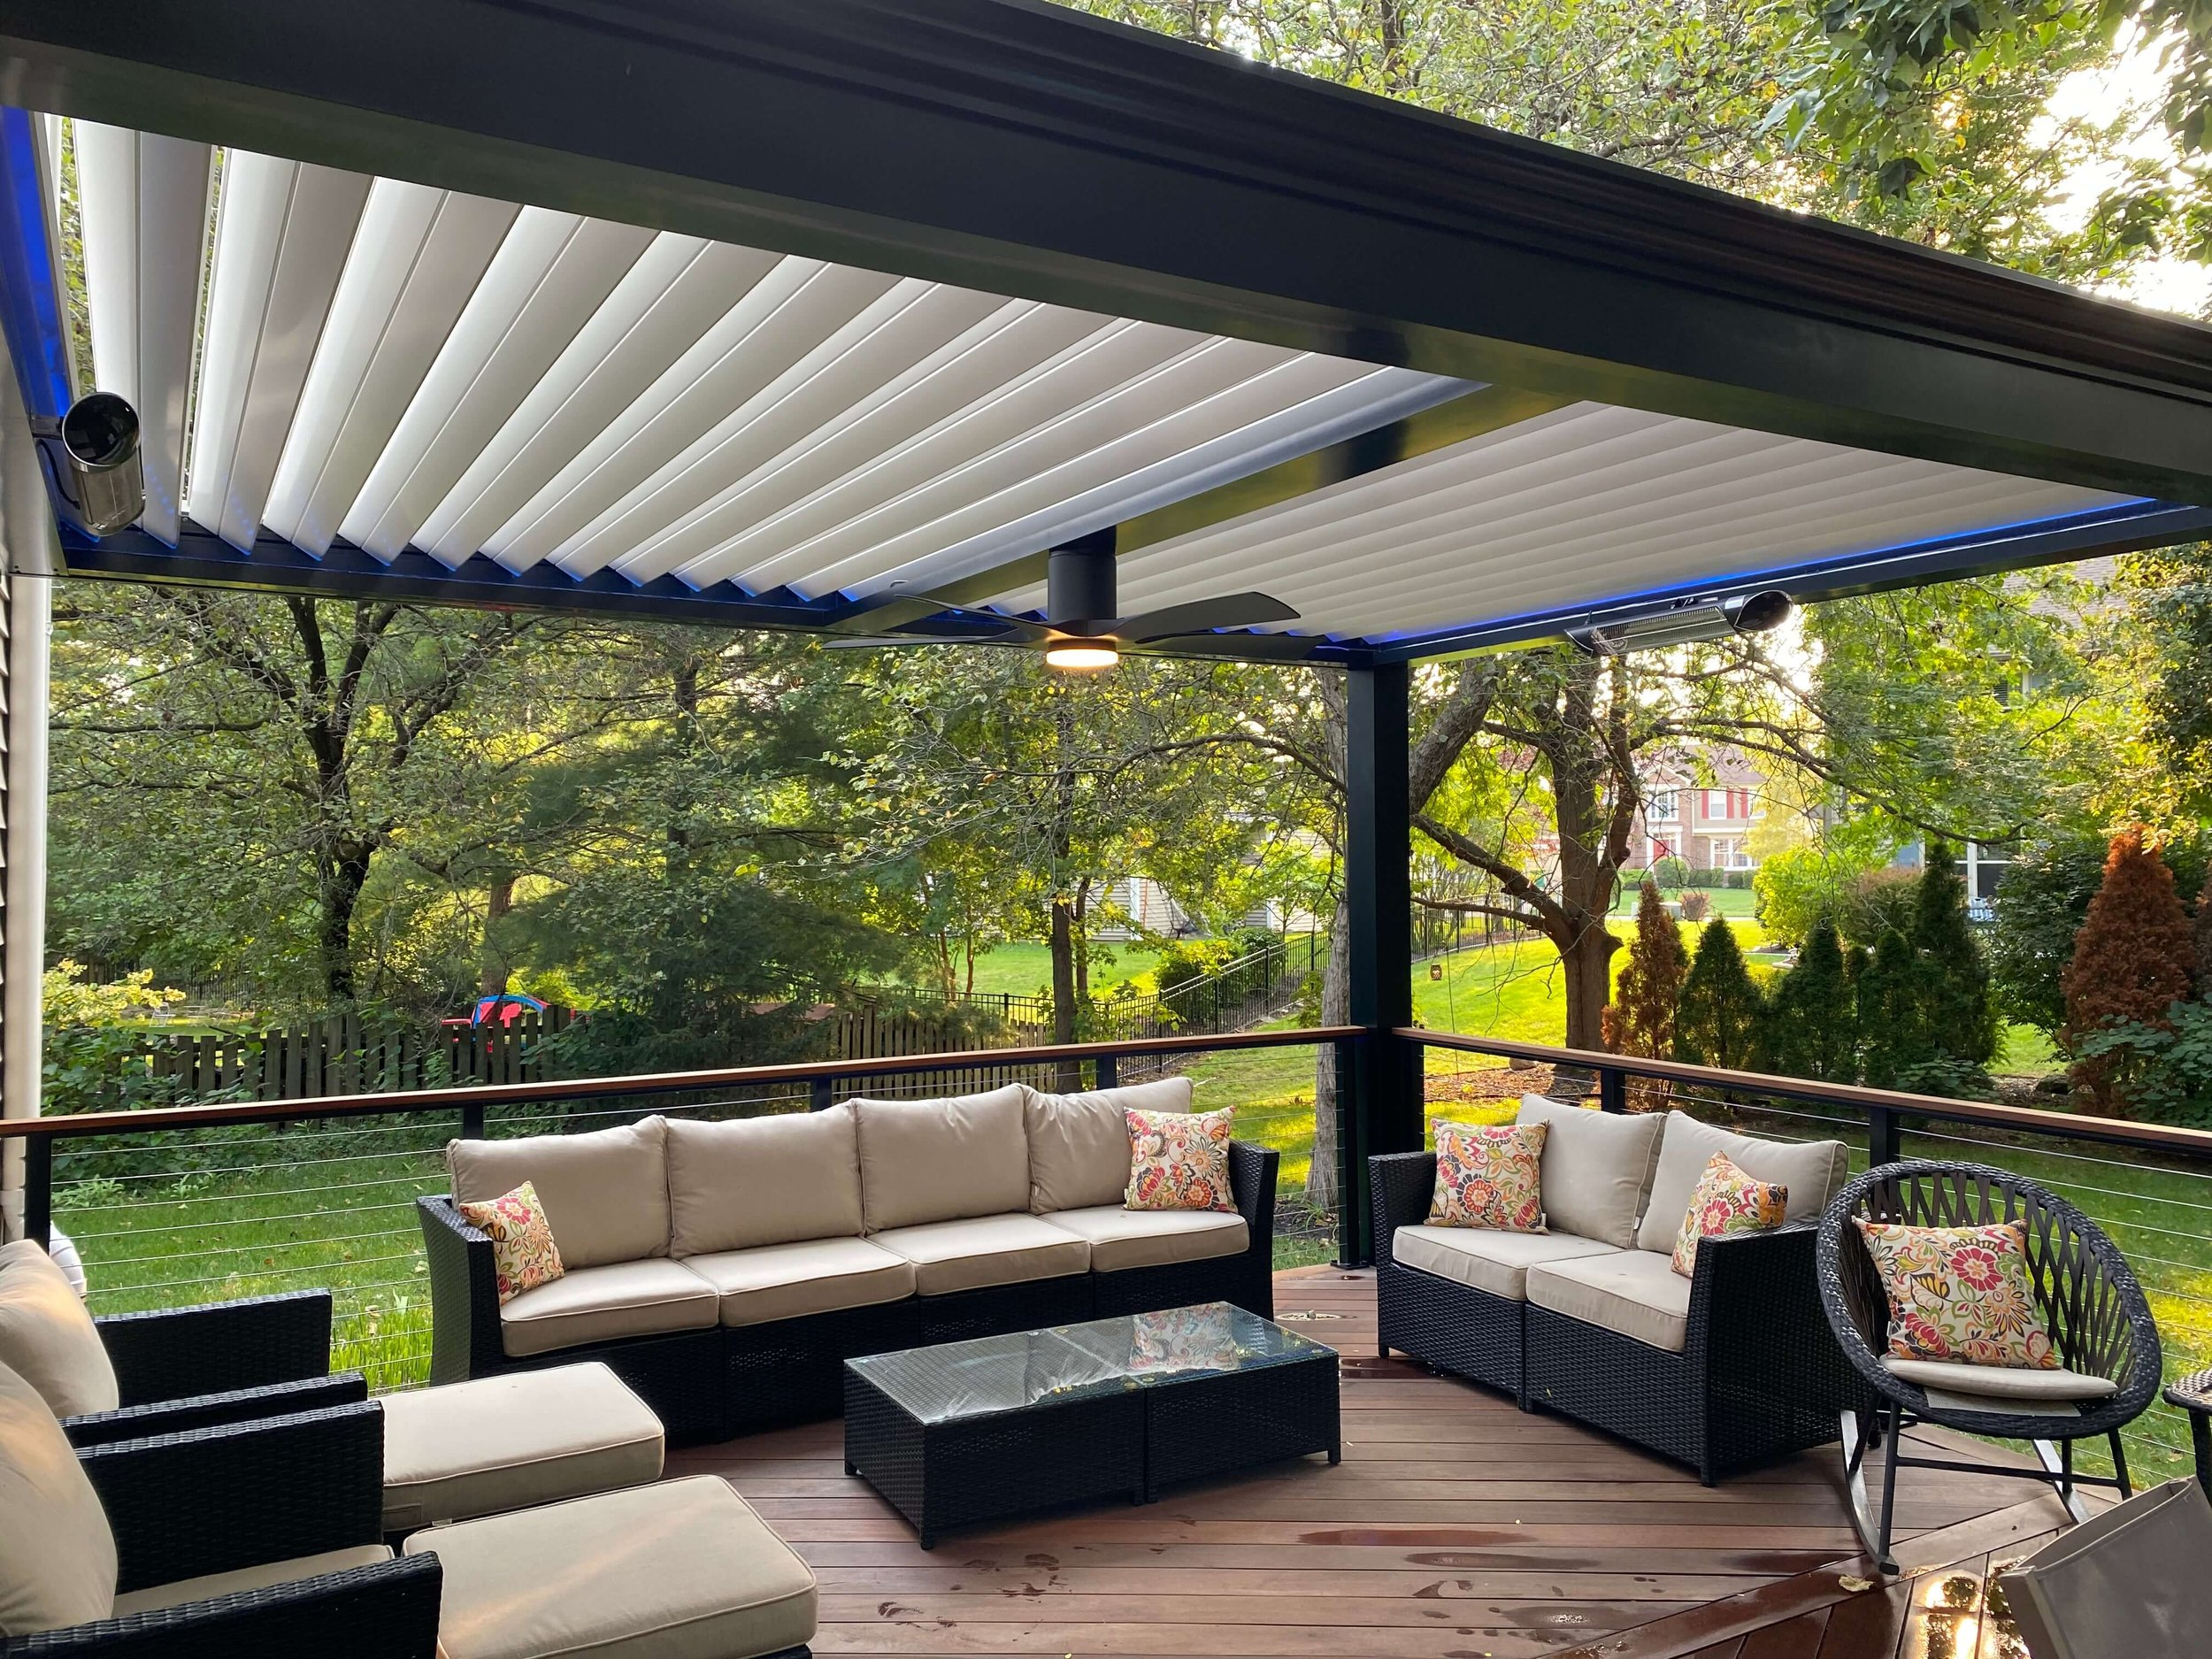 Plenty of curb appeal added with pergola structures.  Your outdoor area can truly be enhanced with outdoor structures.